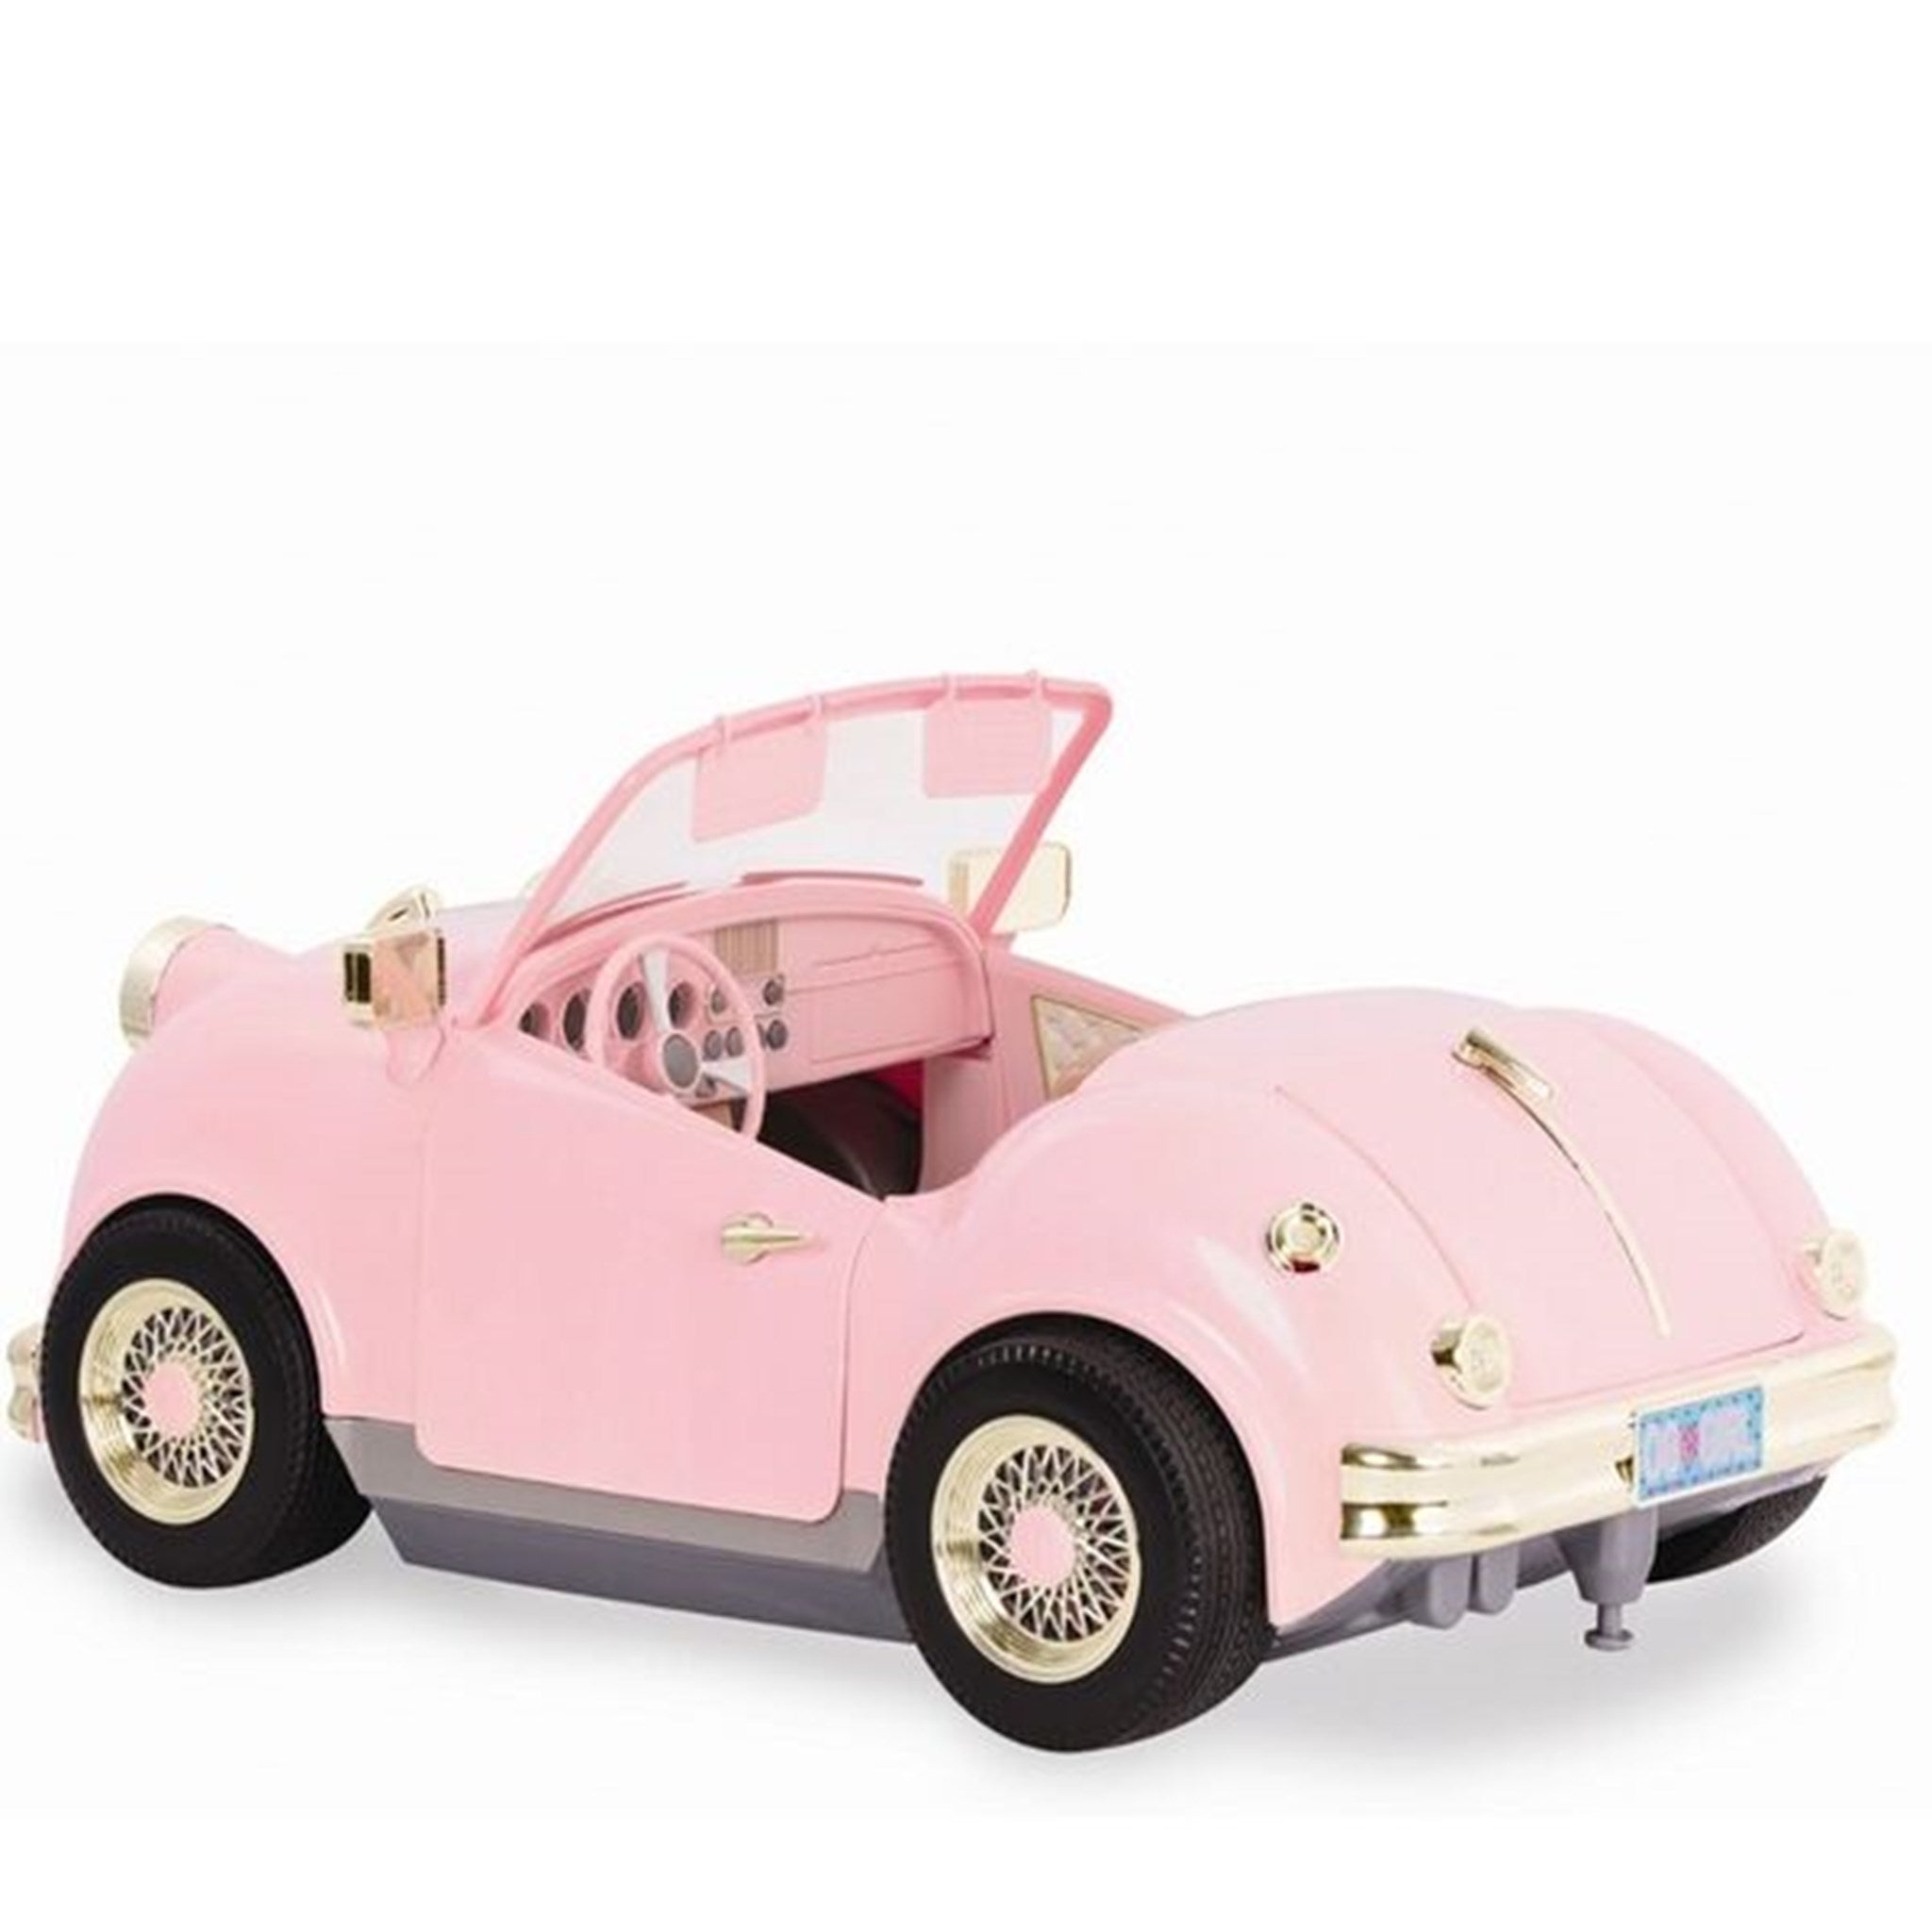 Our Generation Retro Car Pink 4